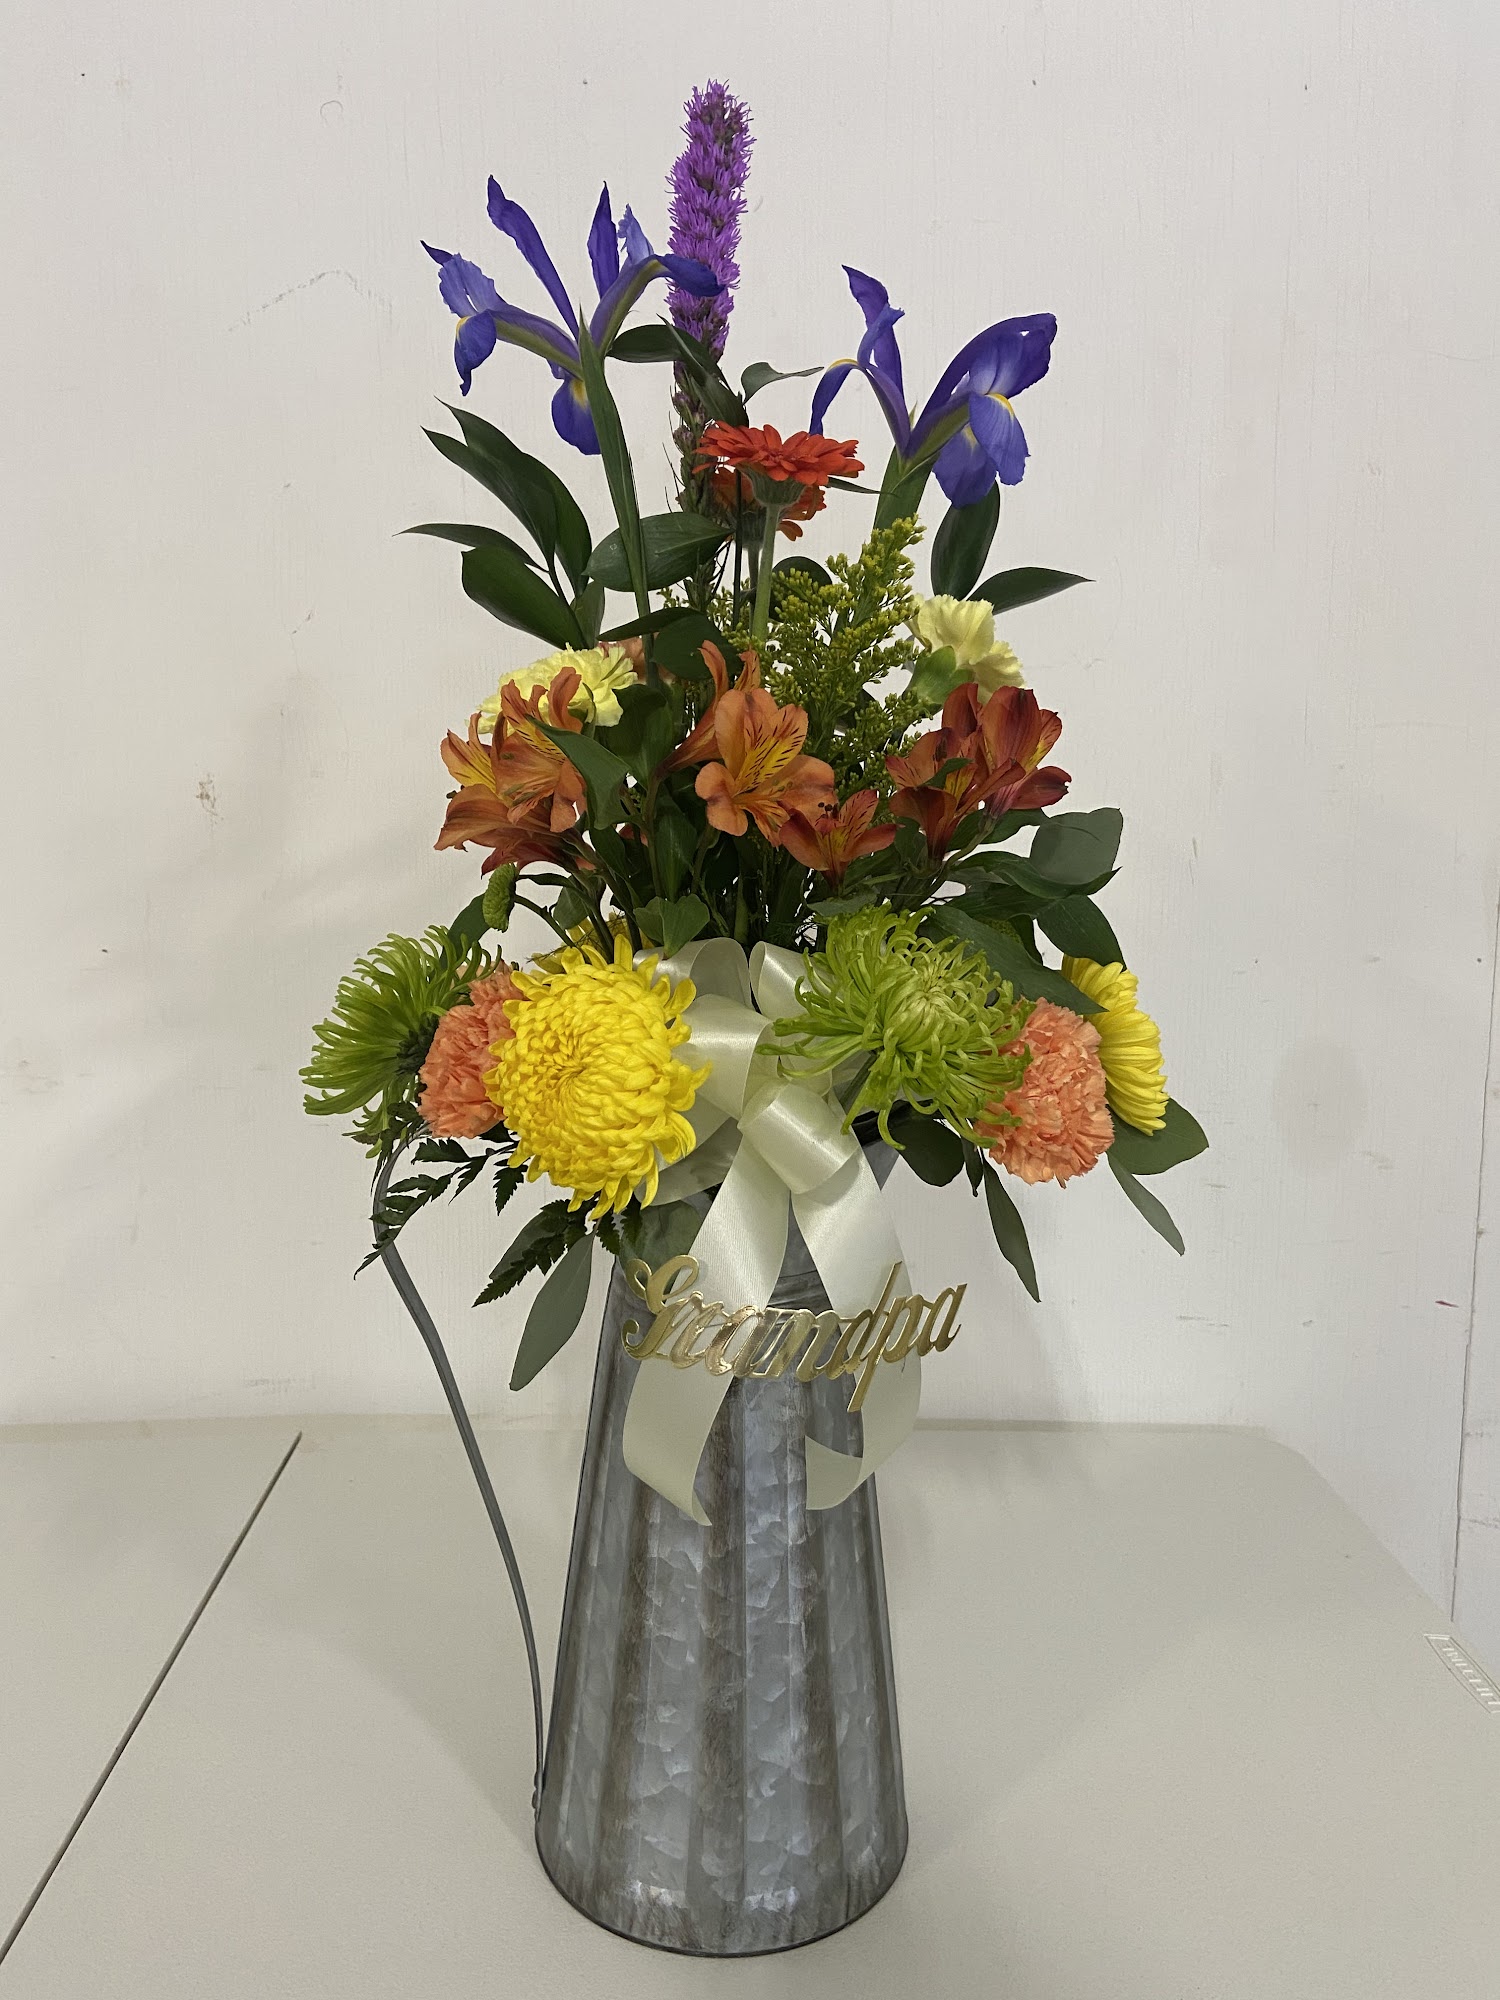 Rita Mae's Flowers & Gifts 888 NY-41, Willet New York 13863